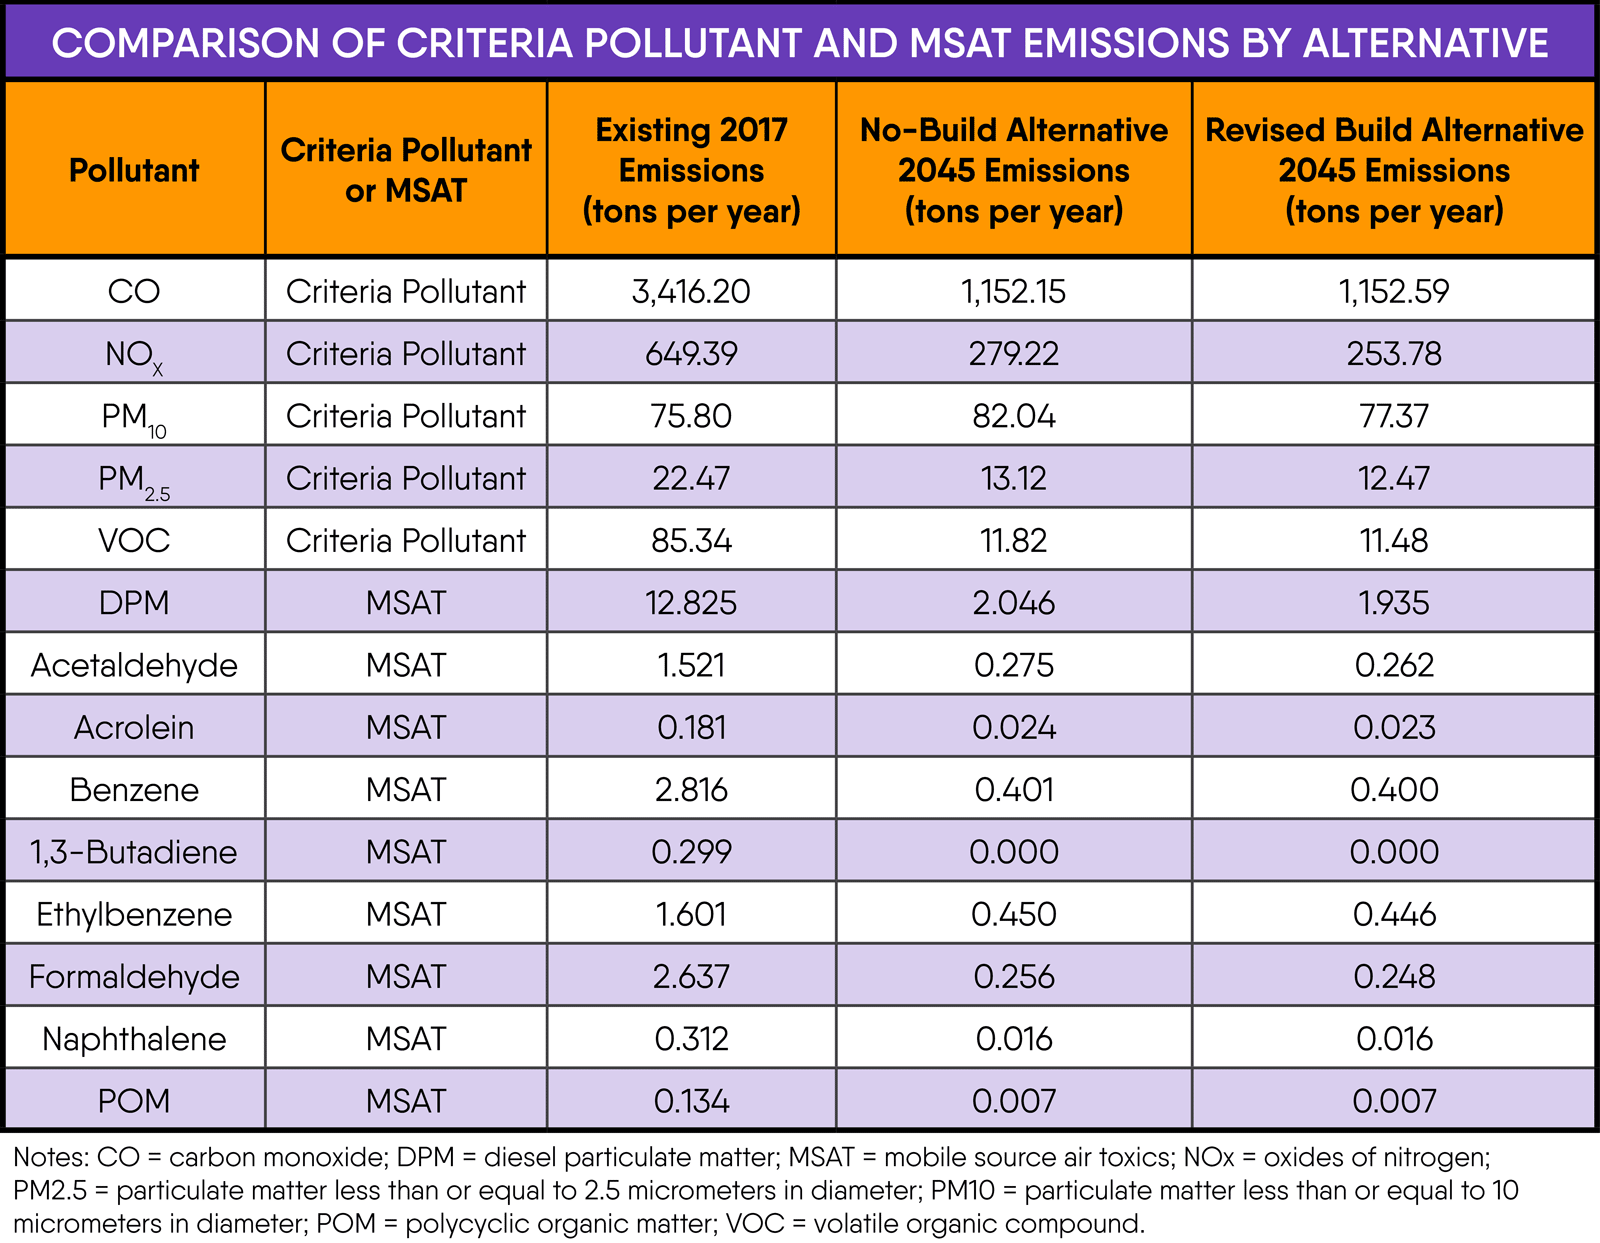 Table: Comparison of criteria pollutant and MSAT emissions by alternative.